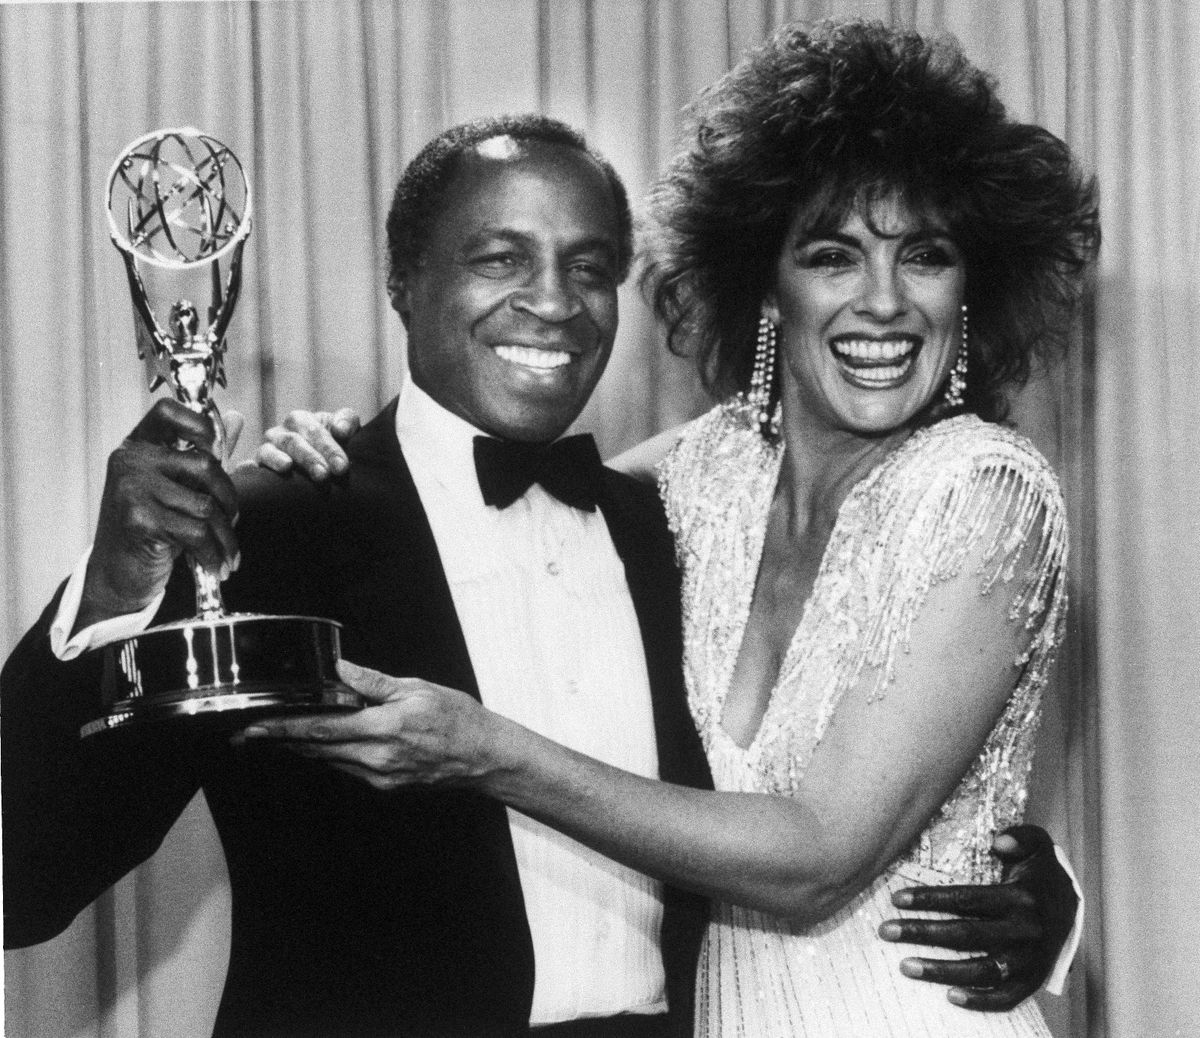 FILE - In this Sept. 22, 1985 file photo, actor Robert Guillaume, star of "Benson", gets a hug from Linda Gray of "Dallas" who presented him with the Emmy for outstanding lead actor in a comedy series, in Pasadena, Calif.  Guillaume, who won Emmy Awards for his roles on Soap and Benson, died Tuesday, Oct. 24, 2017 in Los Angeles at age 89. Guillaumes widow Donna Brown Guillaume says he had been battling prostate cancer. (AP Photo/File) ORG XMIT: NYET232 (AP)